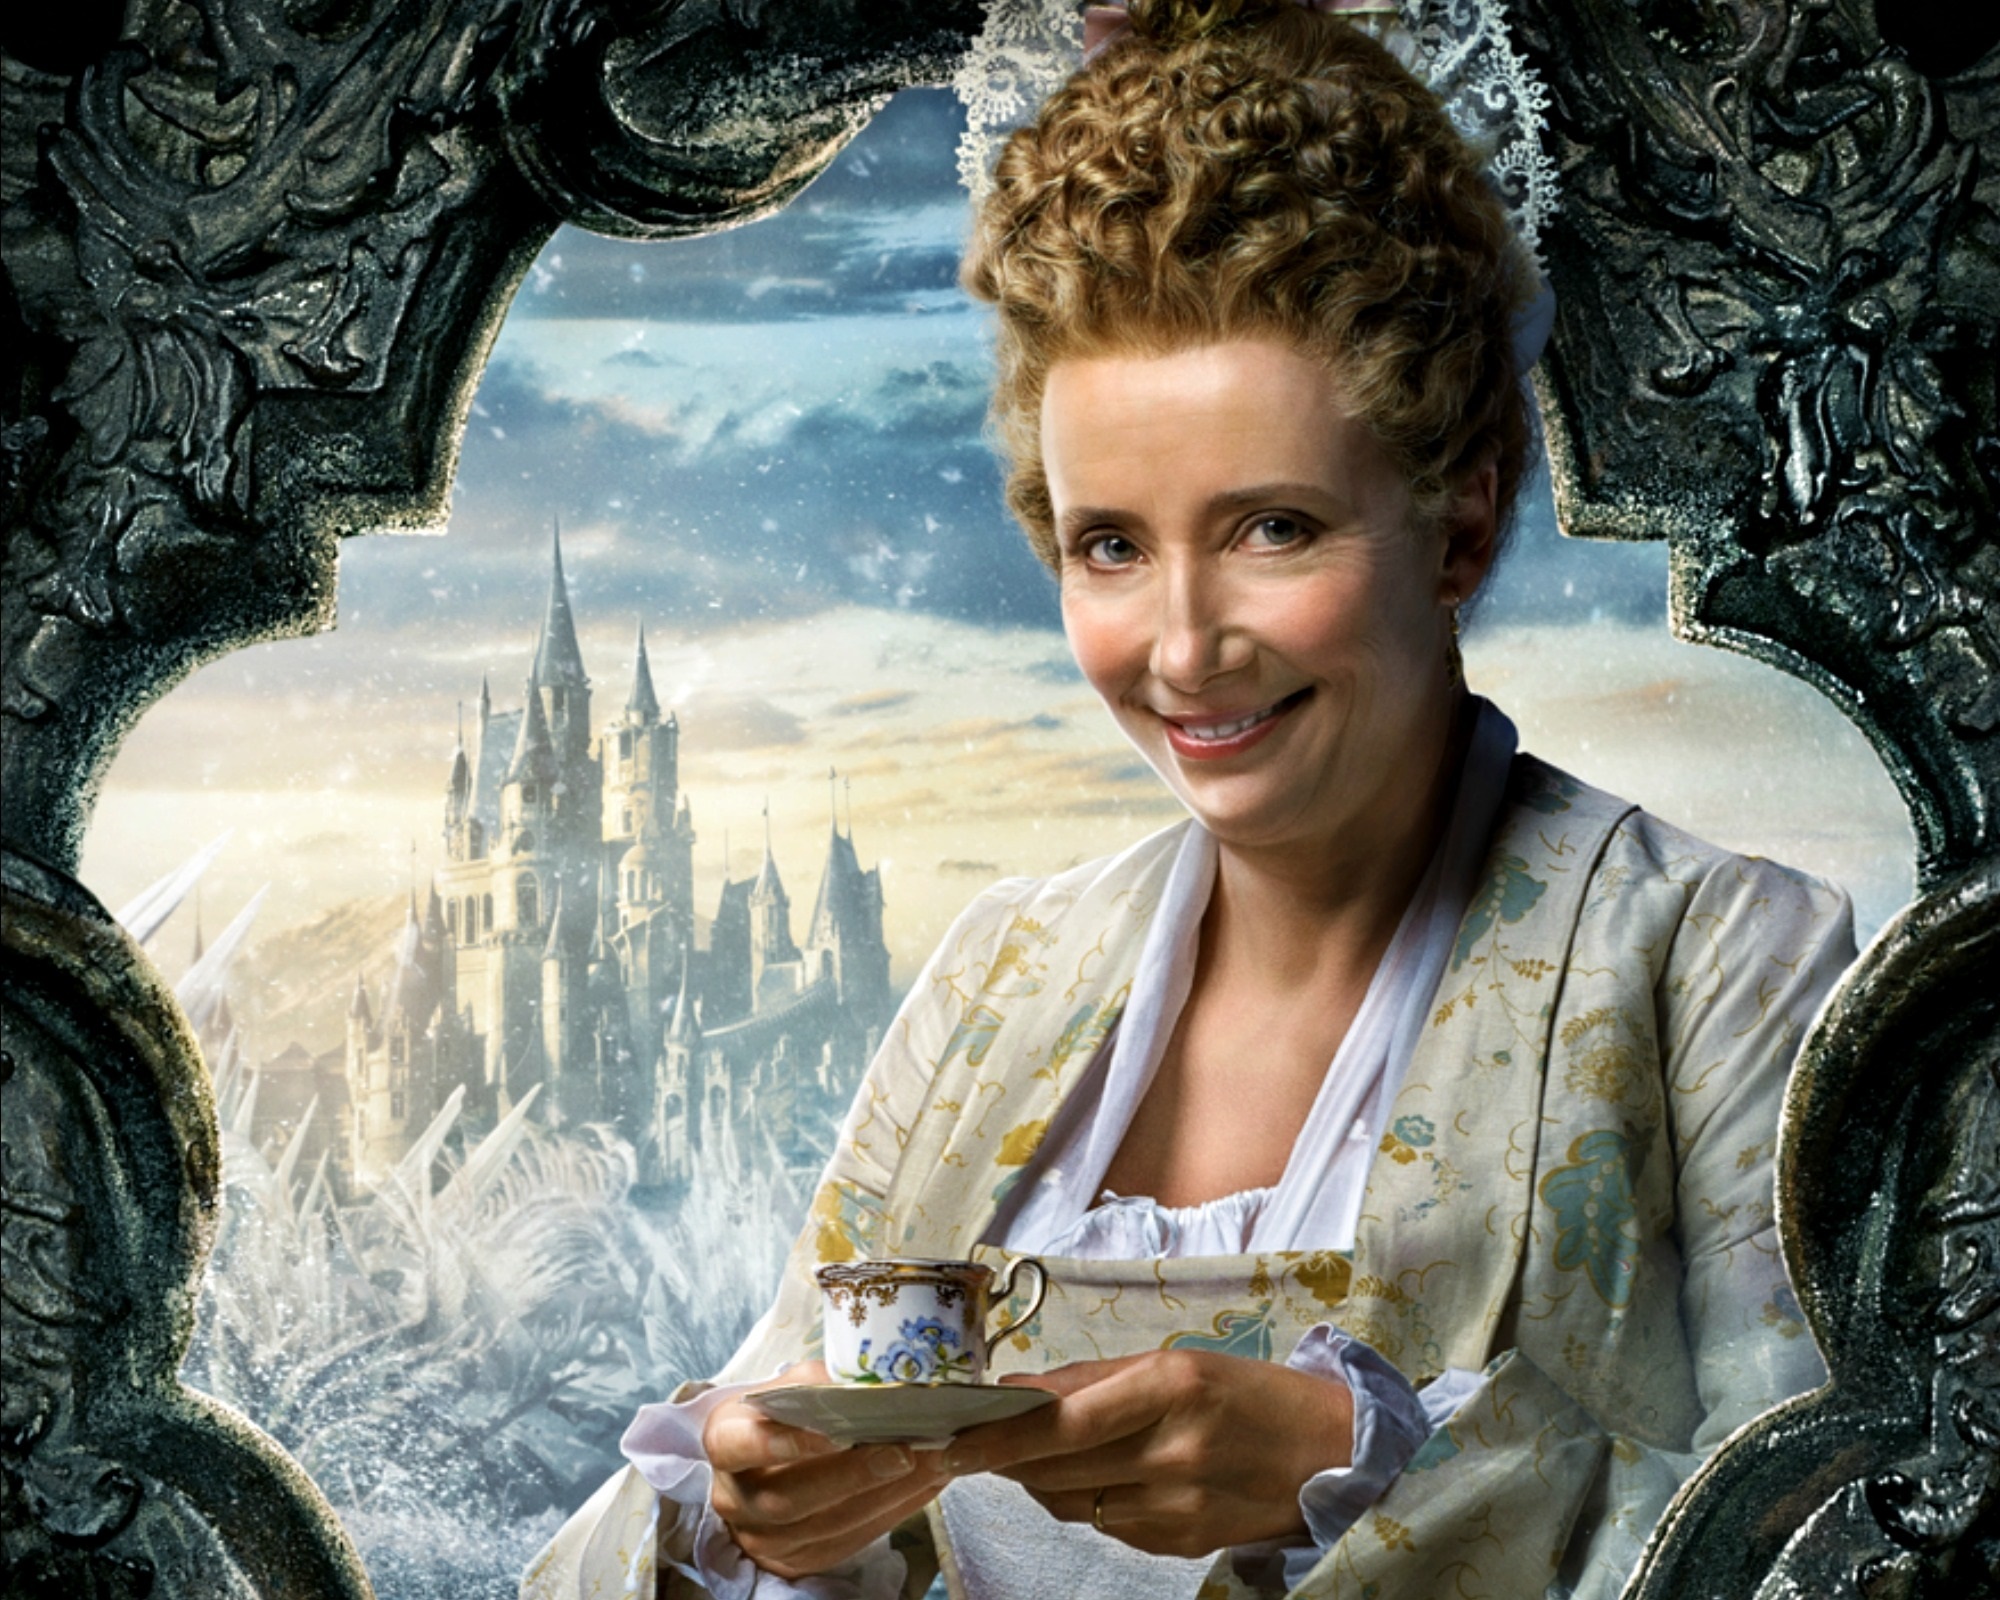 Beauty And The Beast - Beauty And The Beast 2017 Emma Thompson - HD Wallpaper 